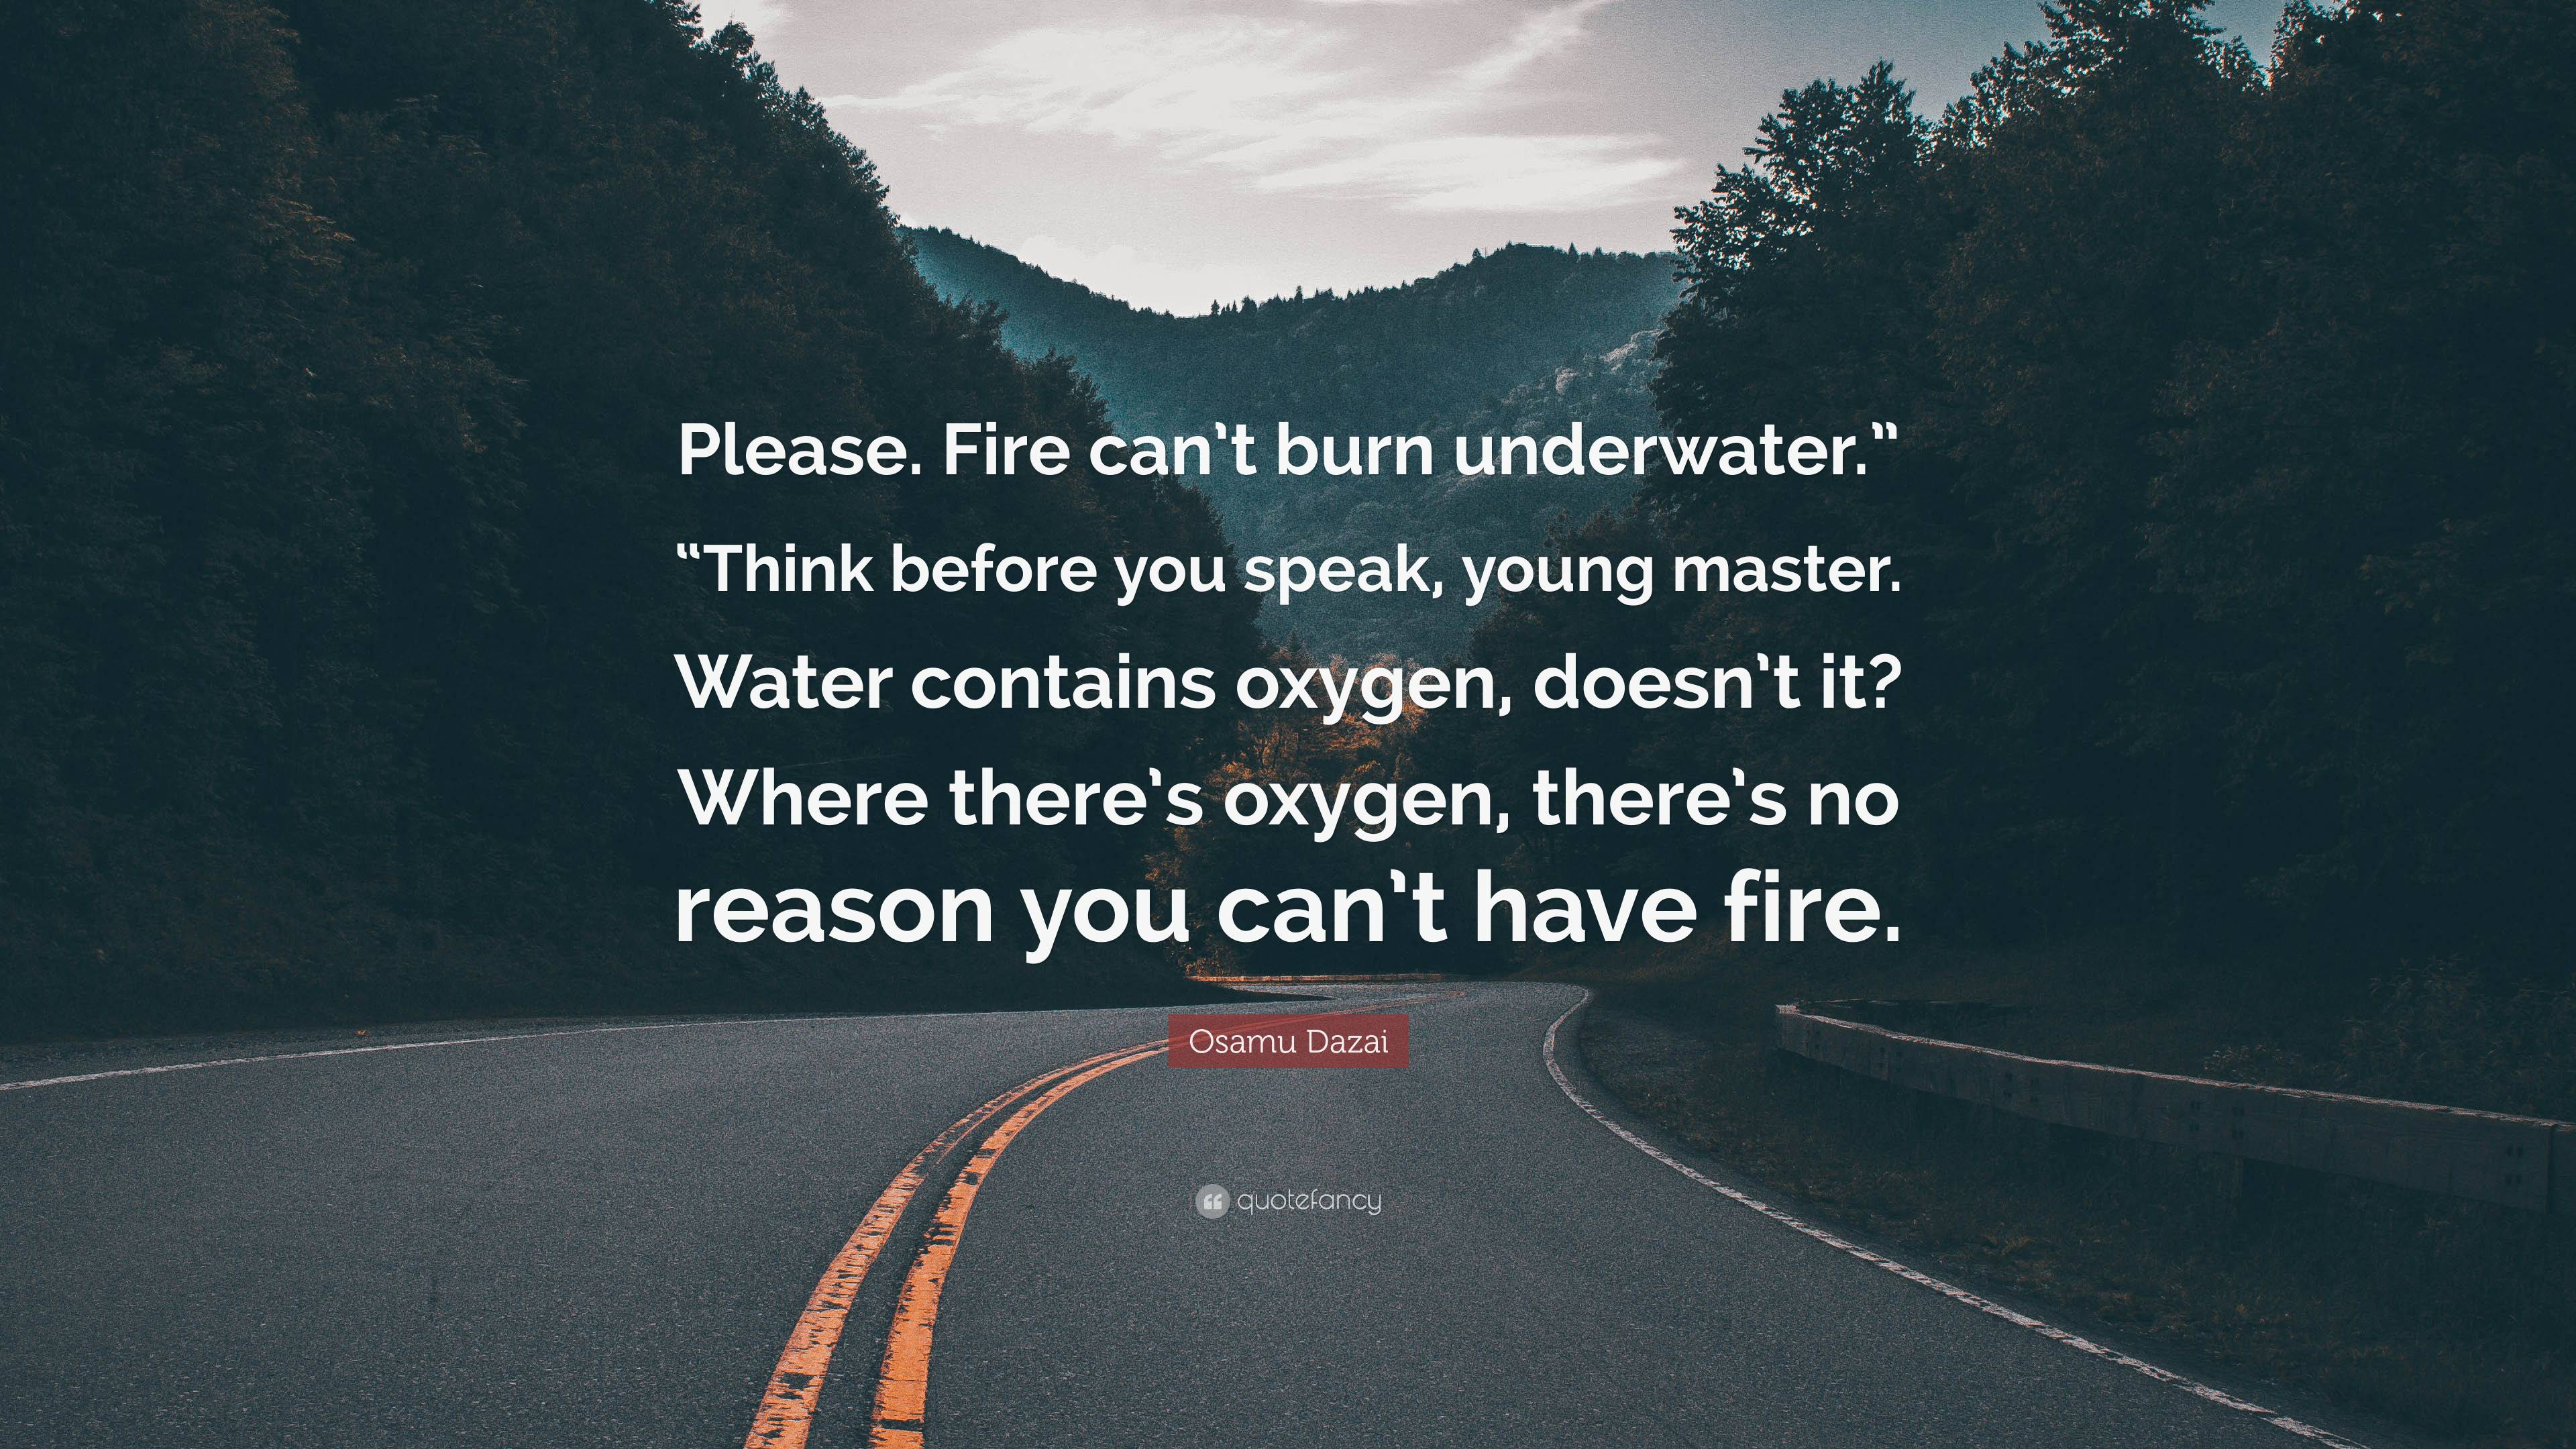 Osamu Dazai Quote: “Please. Fire can't burn underwater.” “Think before you  speak, young master. Water contains oxygen, doesn't it? Where the”